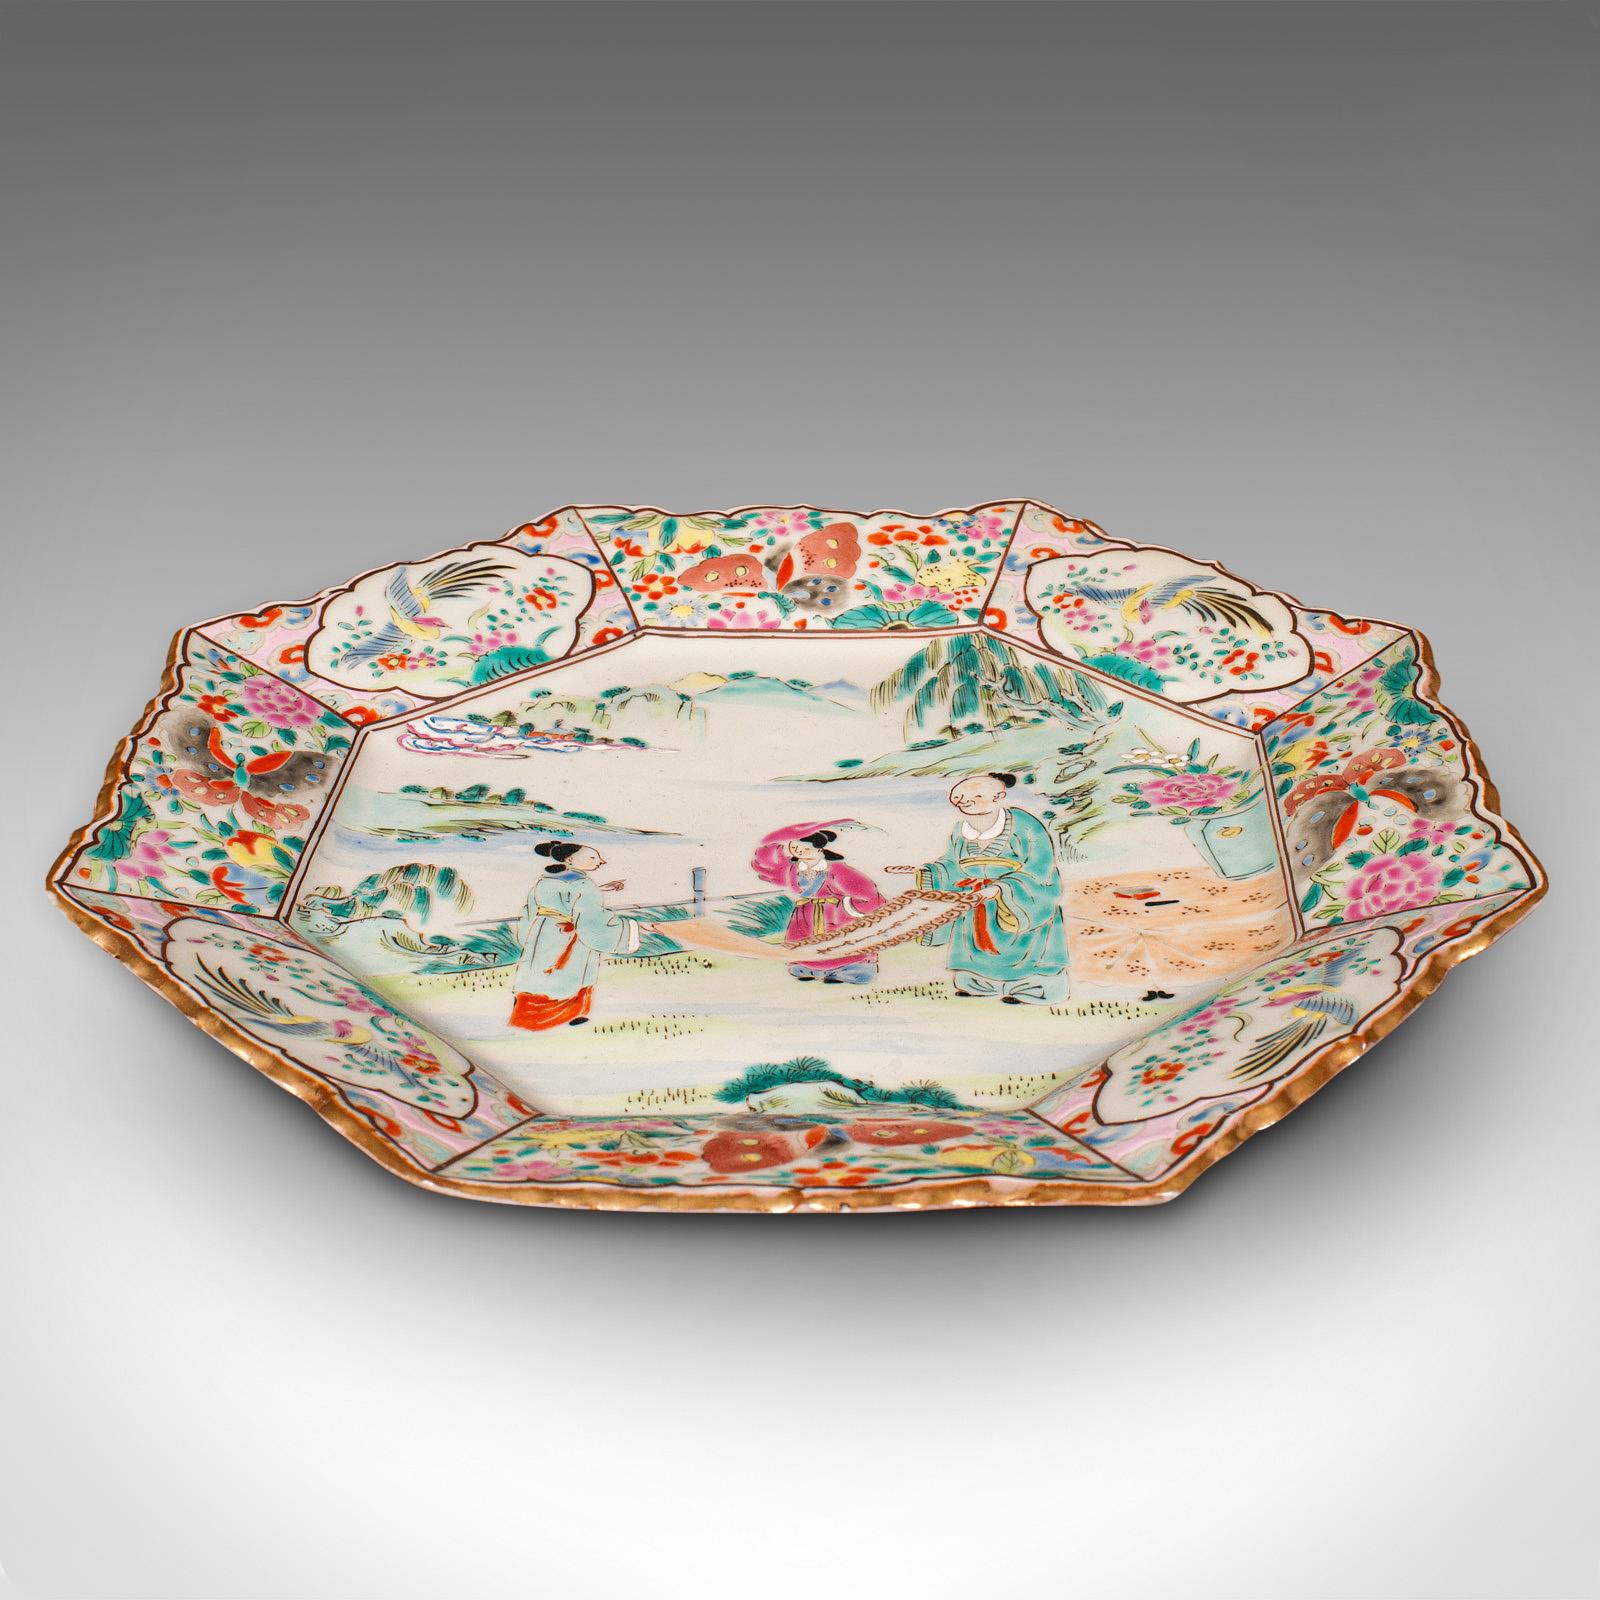 19th Century Antique Octagonal Serving Plate, Japanese, Ceramic, Decor, Charger, Victorian For Sale